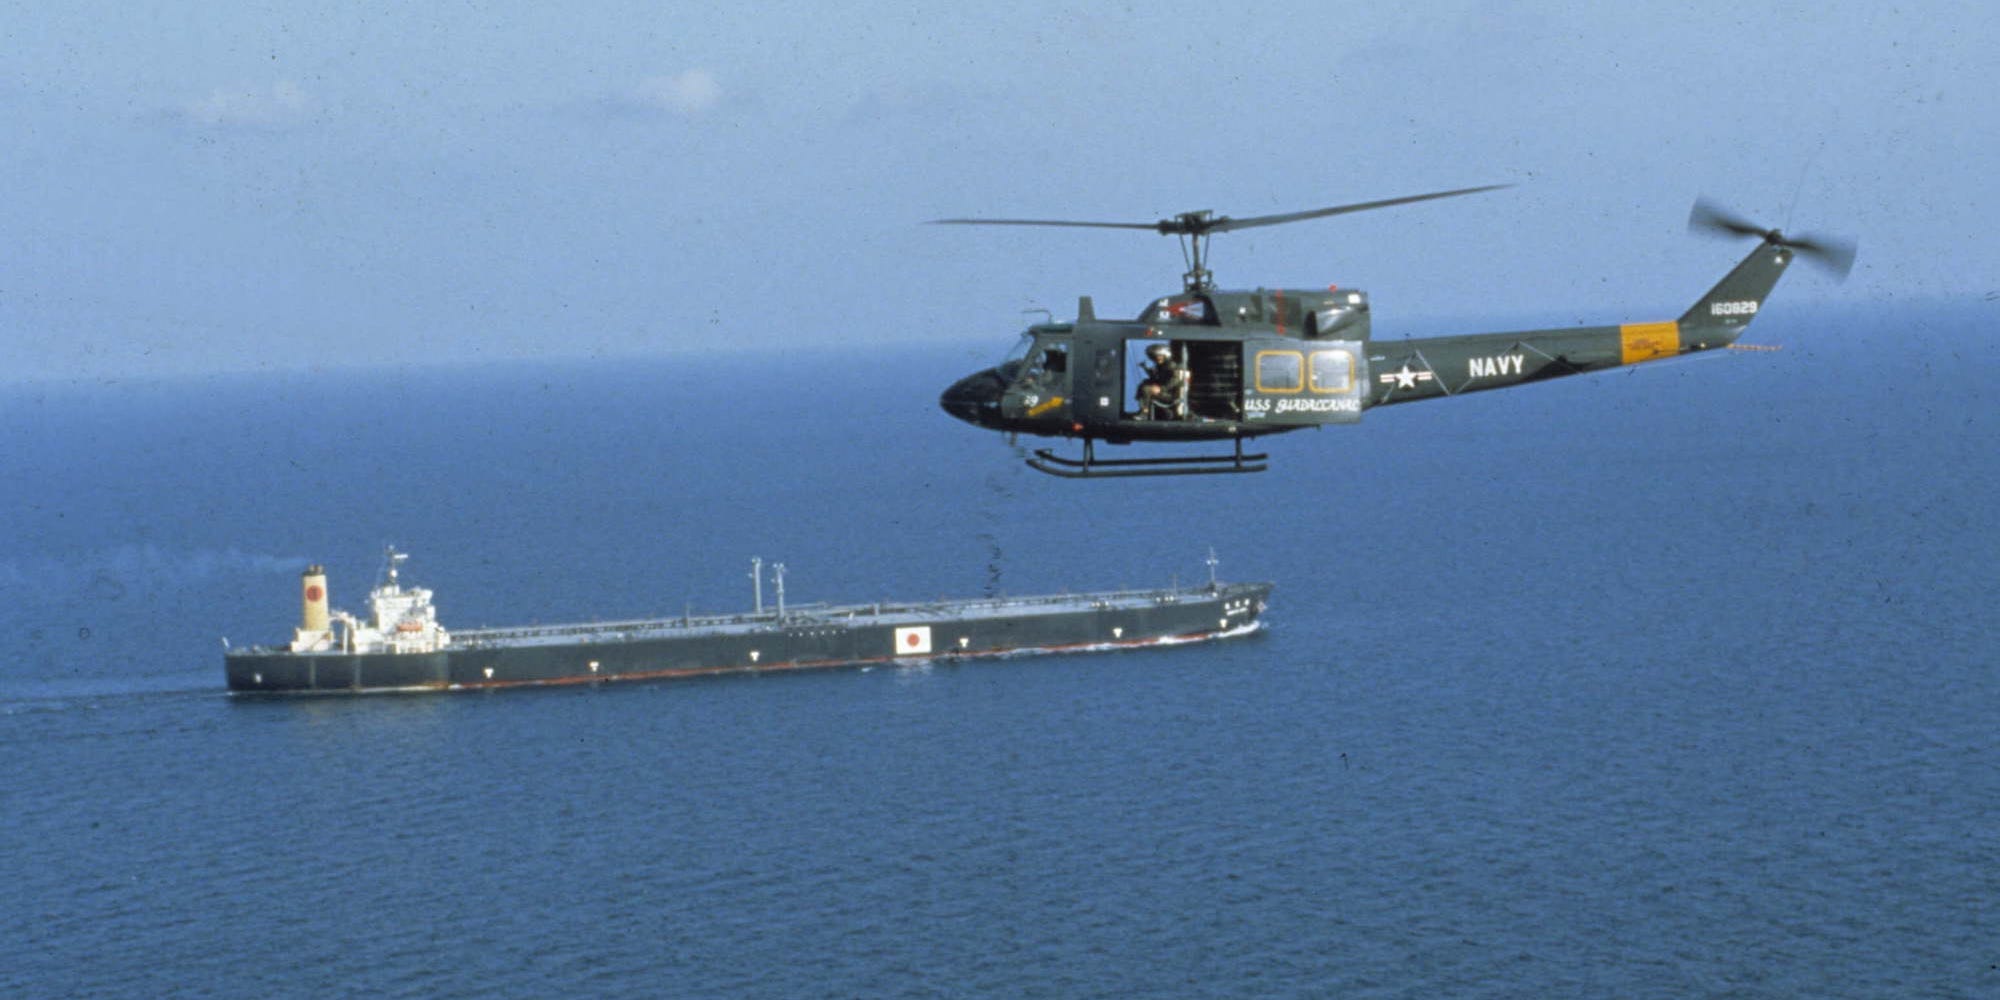 Navy helicopter in Persian Gulf during Iran-Iraq war